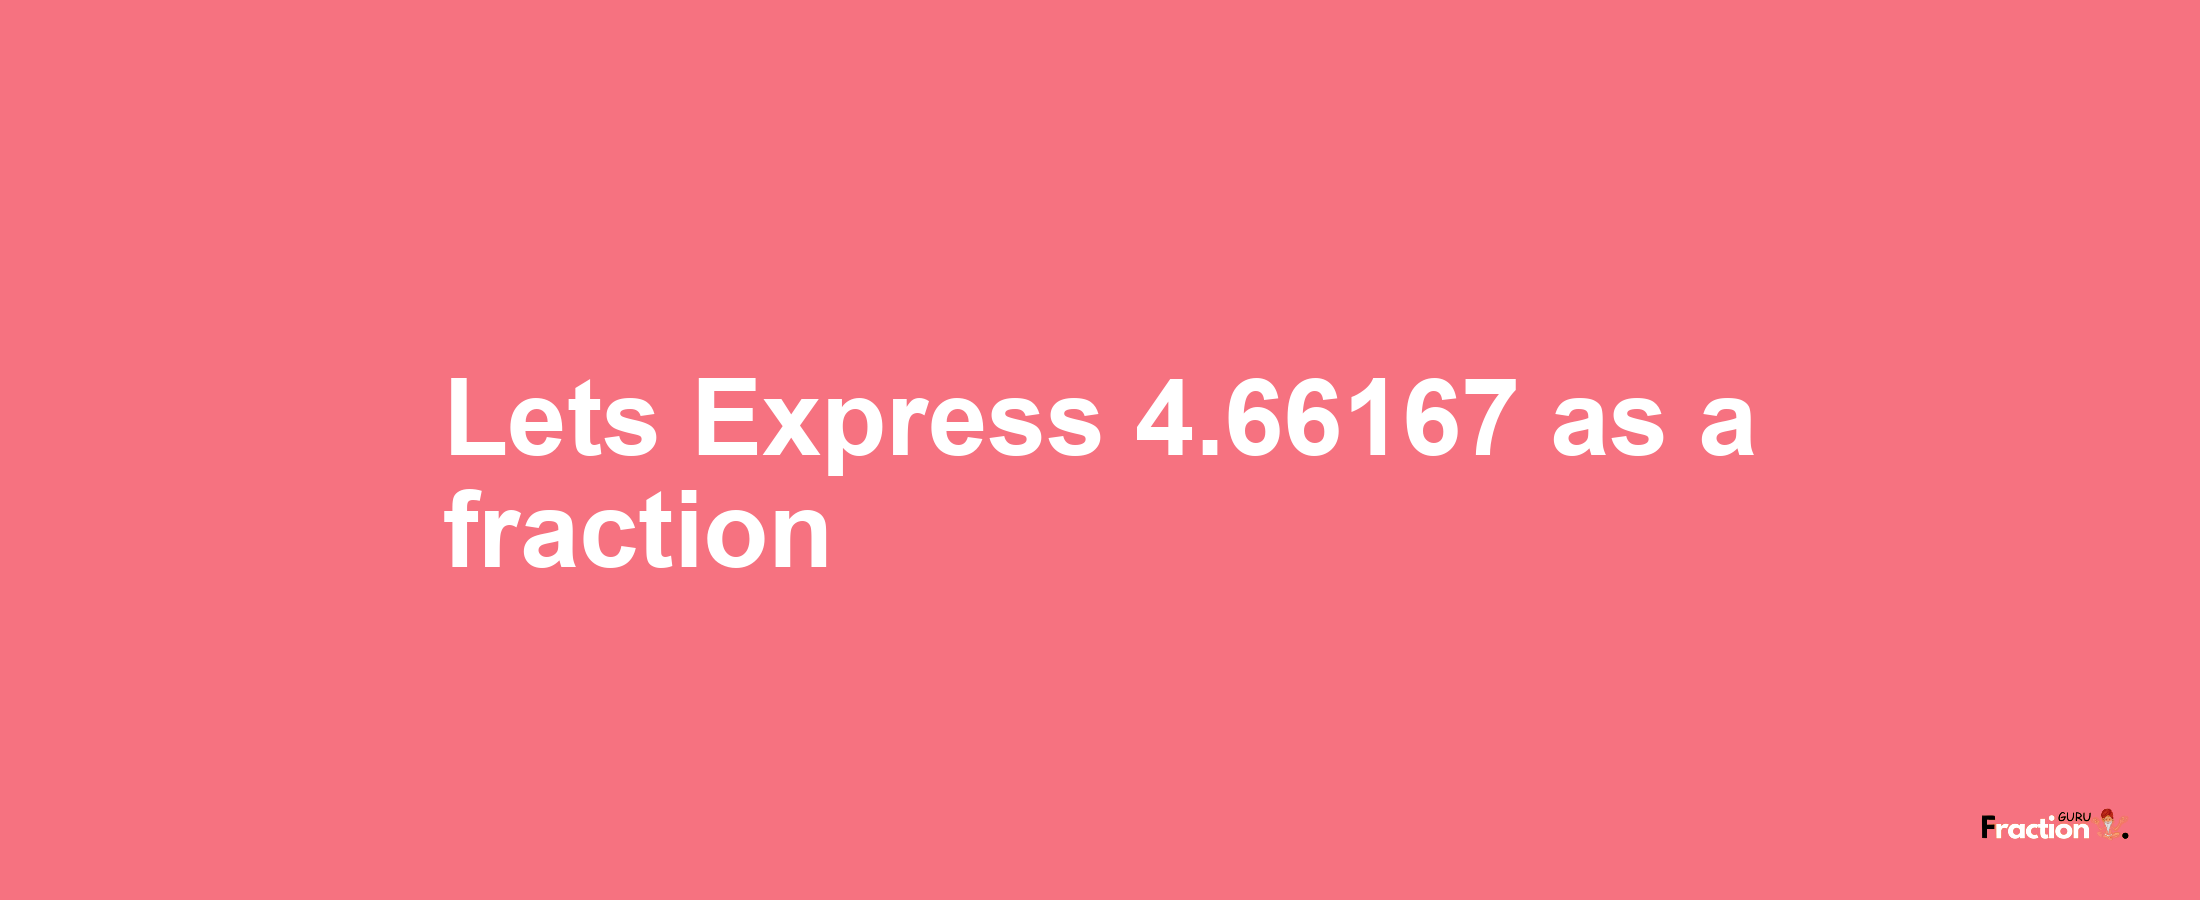 Lets Express 4.66167 as afraction